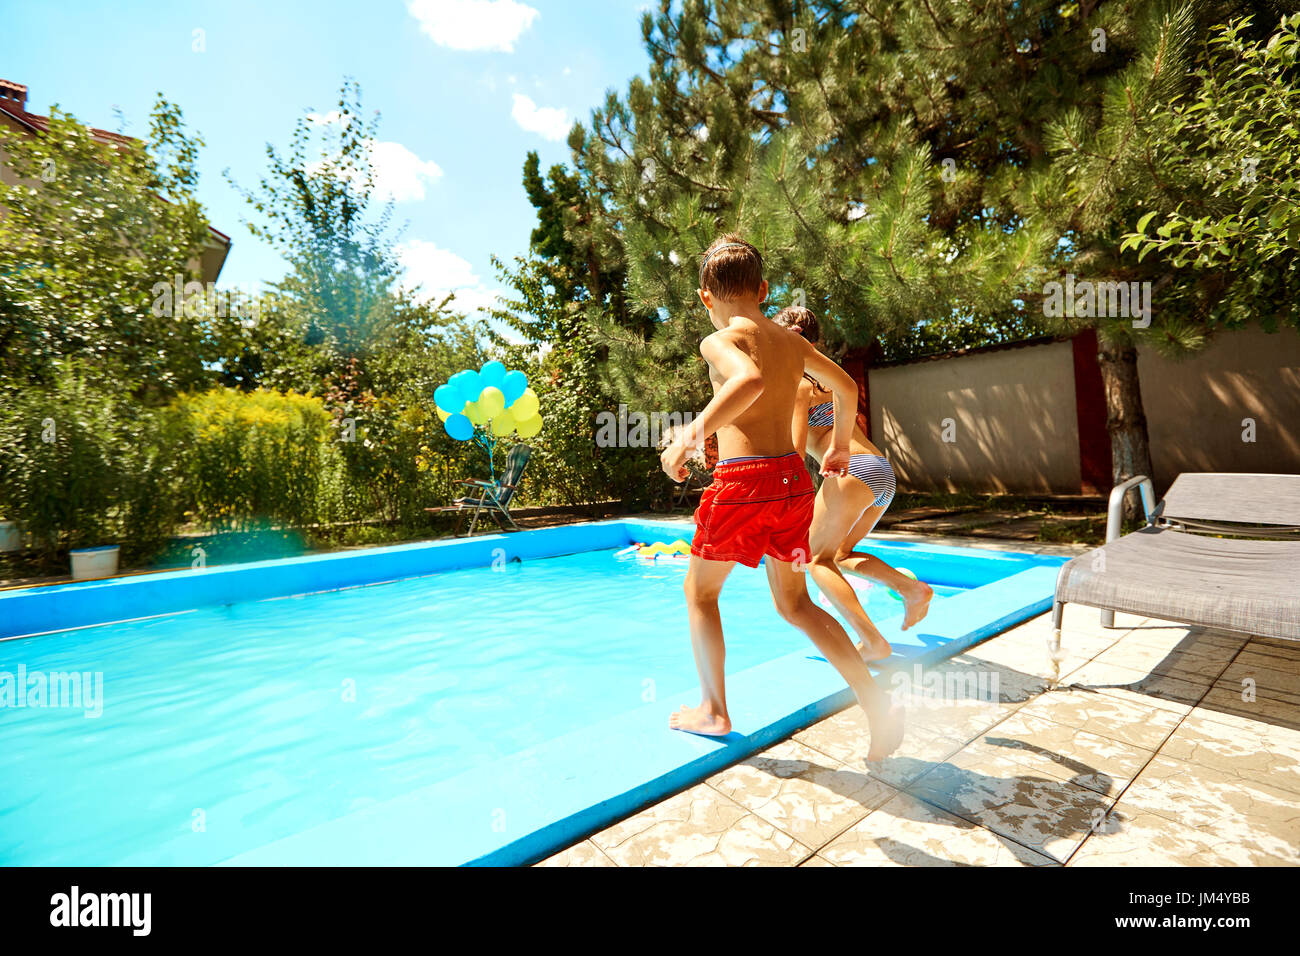 Children jump into the pool in the summer Stock Photo